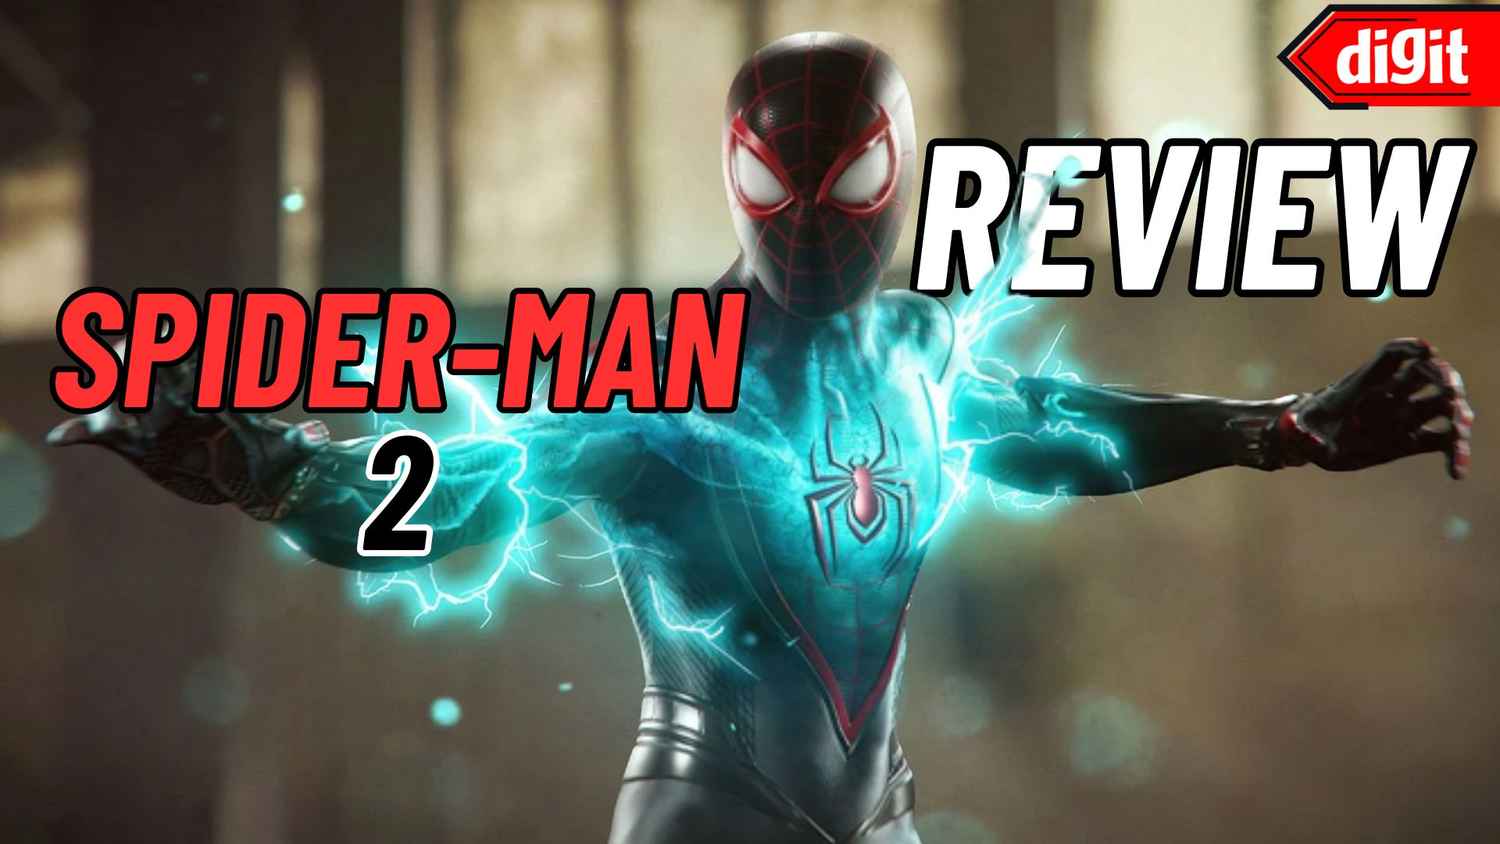 Marvel's Spider-Man 2 Review - Spectacular, Sensational, and